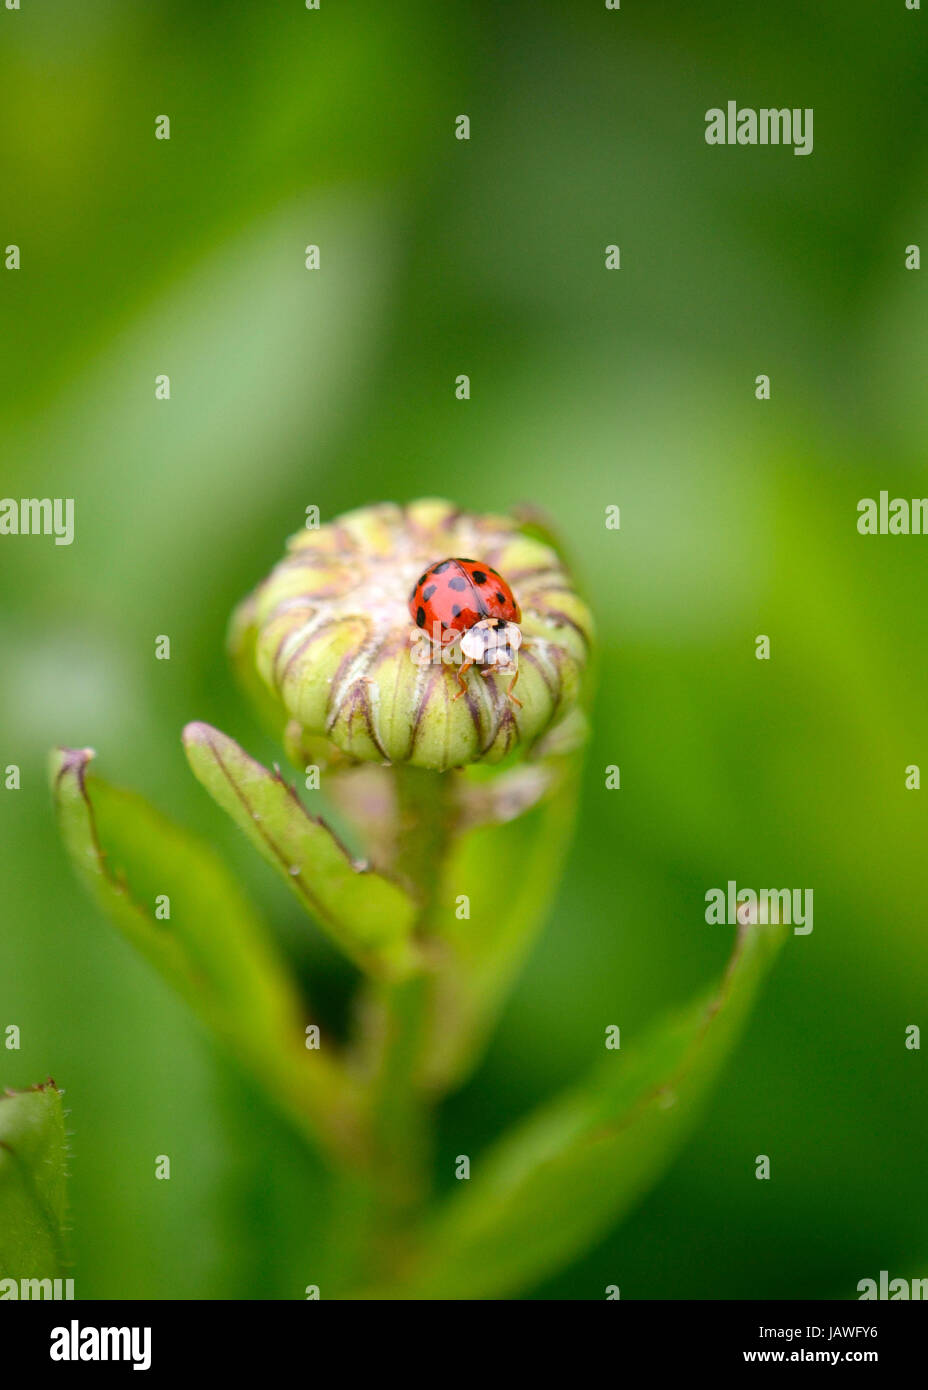 Ladybug isolated on a budding daisy flower, with dense green foliage in soft focus at the background. Stock Photo